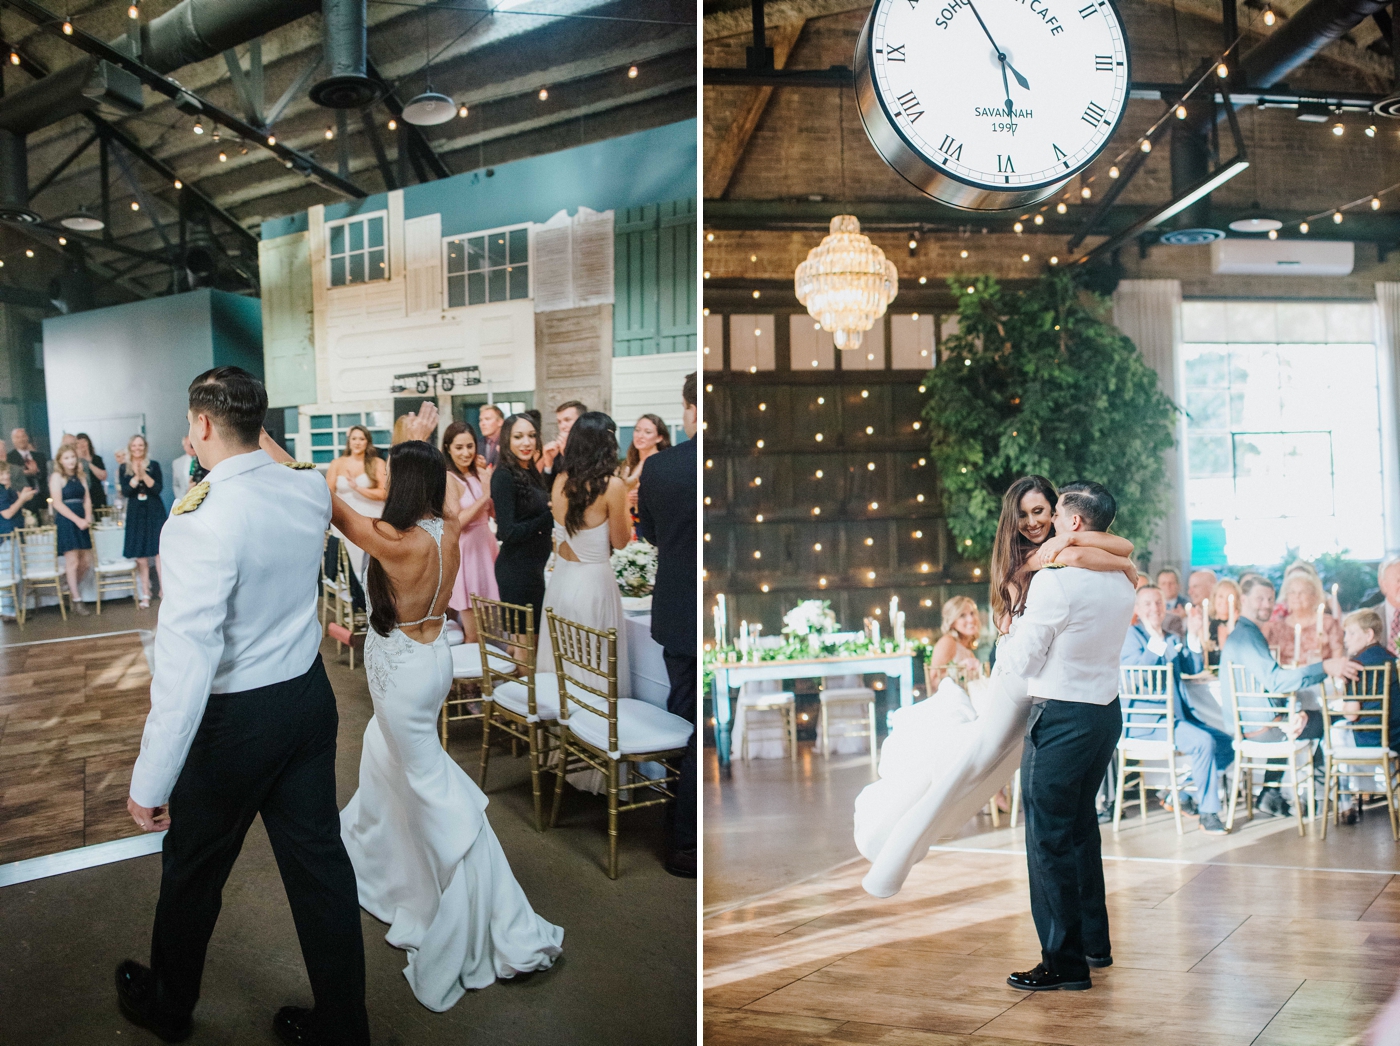 Wedding Reception at Soho South Cafe in Savannah | Izzy and Co.